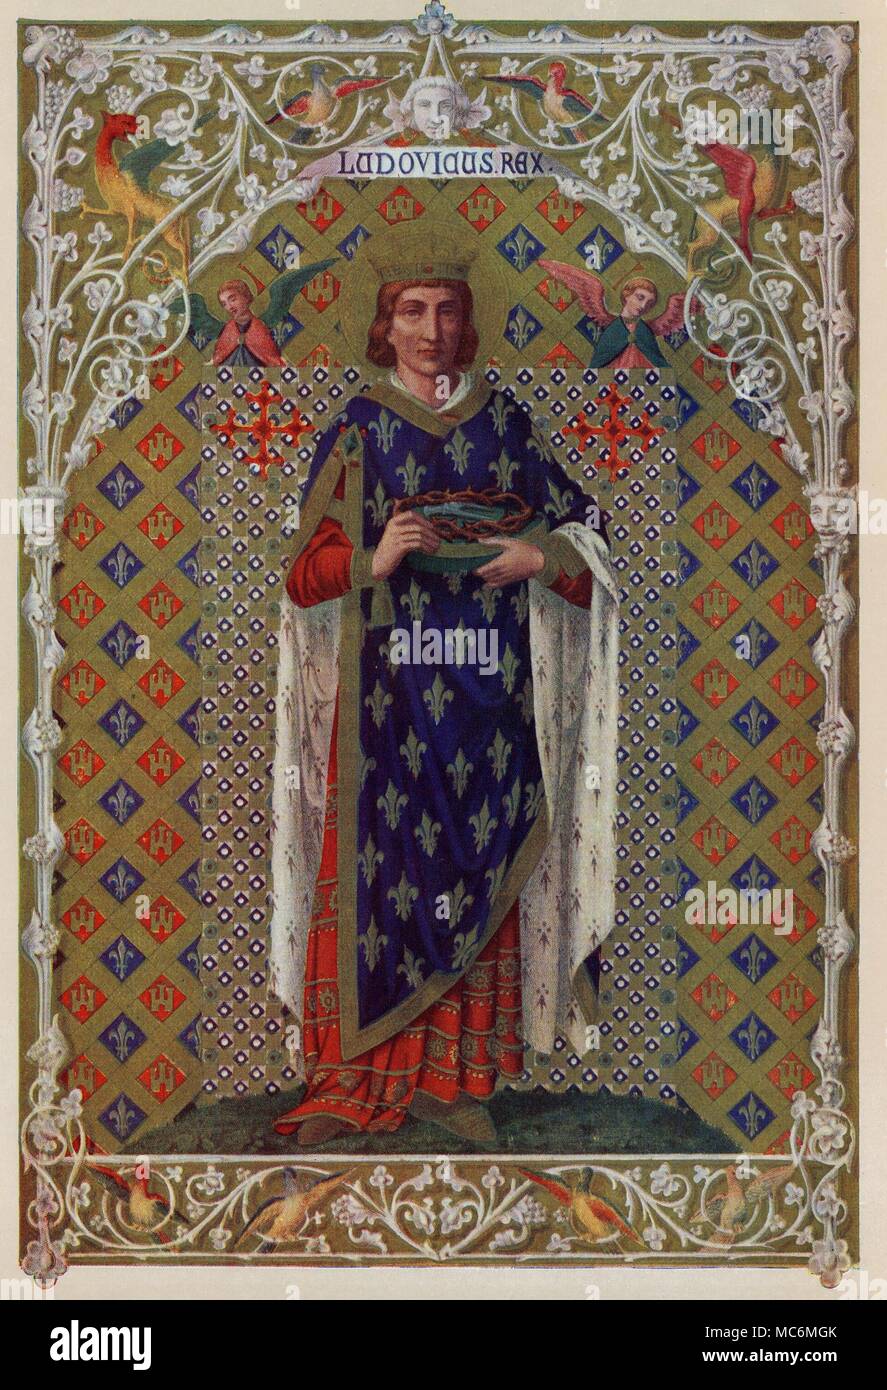 saints-louis-of-france-king-louis-here-named-as-ludovicus-rex-was-born-in-1214-the-son-of-louis-viii-of-france-and-blanche-of-castile-his-father-died-when-he-was-12-and-his-mother-established-a-regency-during-his-minority-he-was-brother-in-law-to-henry-iii-if-england-louis-oversaw-the-vast-cathedral-building-programme-which-occupied-so-much-of-the-creative-energies-of-france-during-his-reign-and-he-personally-founded-the-mystic-sainte-chapelle-in-paris-to-house-the-relics-of-the-crown-of-thorns-which-in-this-print-he-carries-in-his-hands-pressed-against-the-fleur-di-lys-of-MC6MGK.jpg